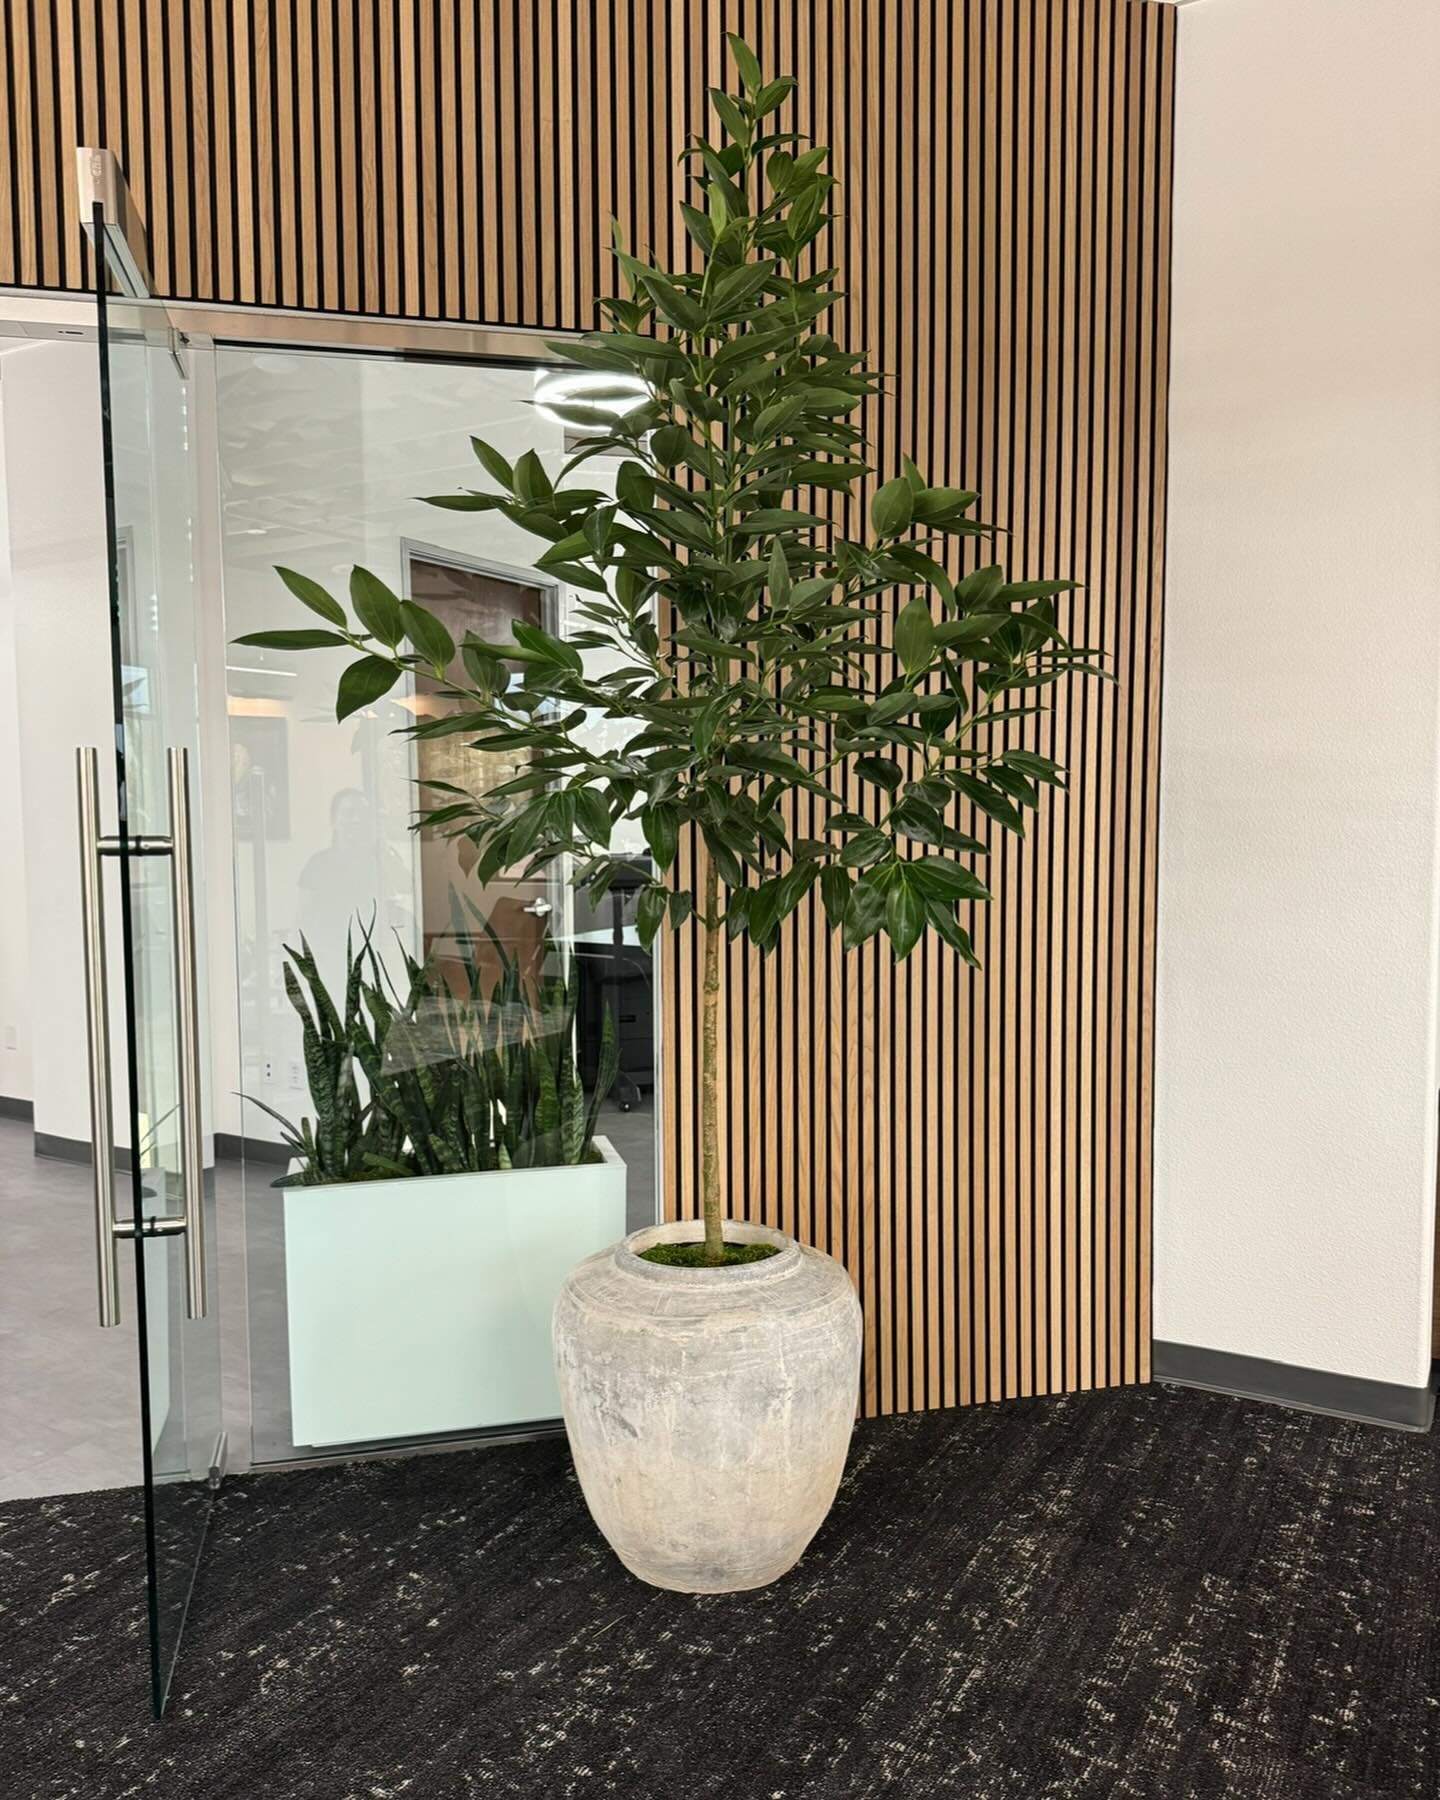 Want to create a healthier, more joyful workplace? Our plant design services specialize in bringing the benefits of nature indoors. Yes&hellip; plants add visual appeal, but they also increase oxygen levels, reduce noise, and promote a sense of calm.